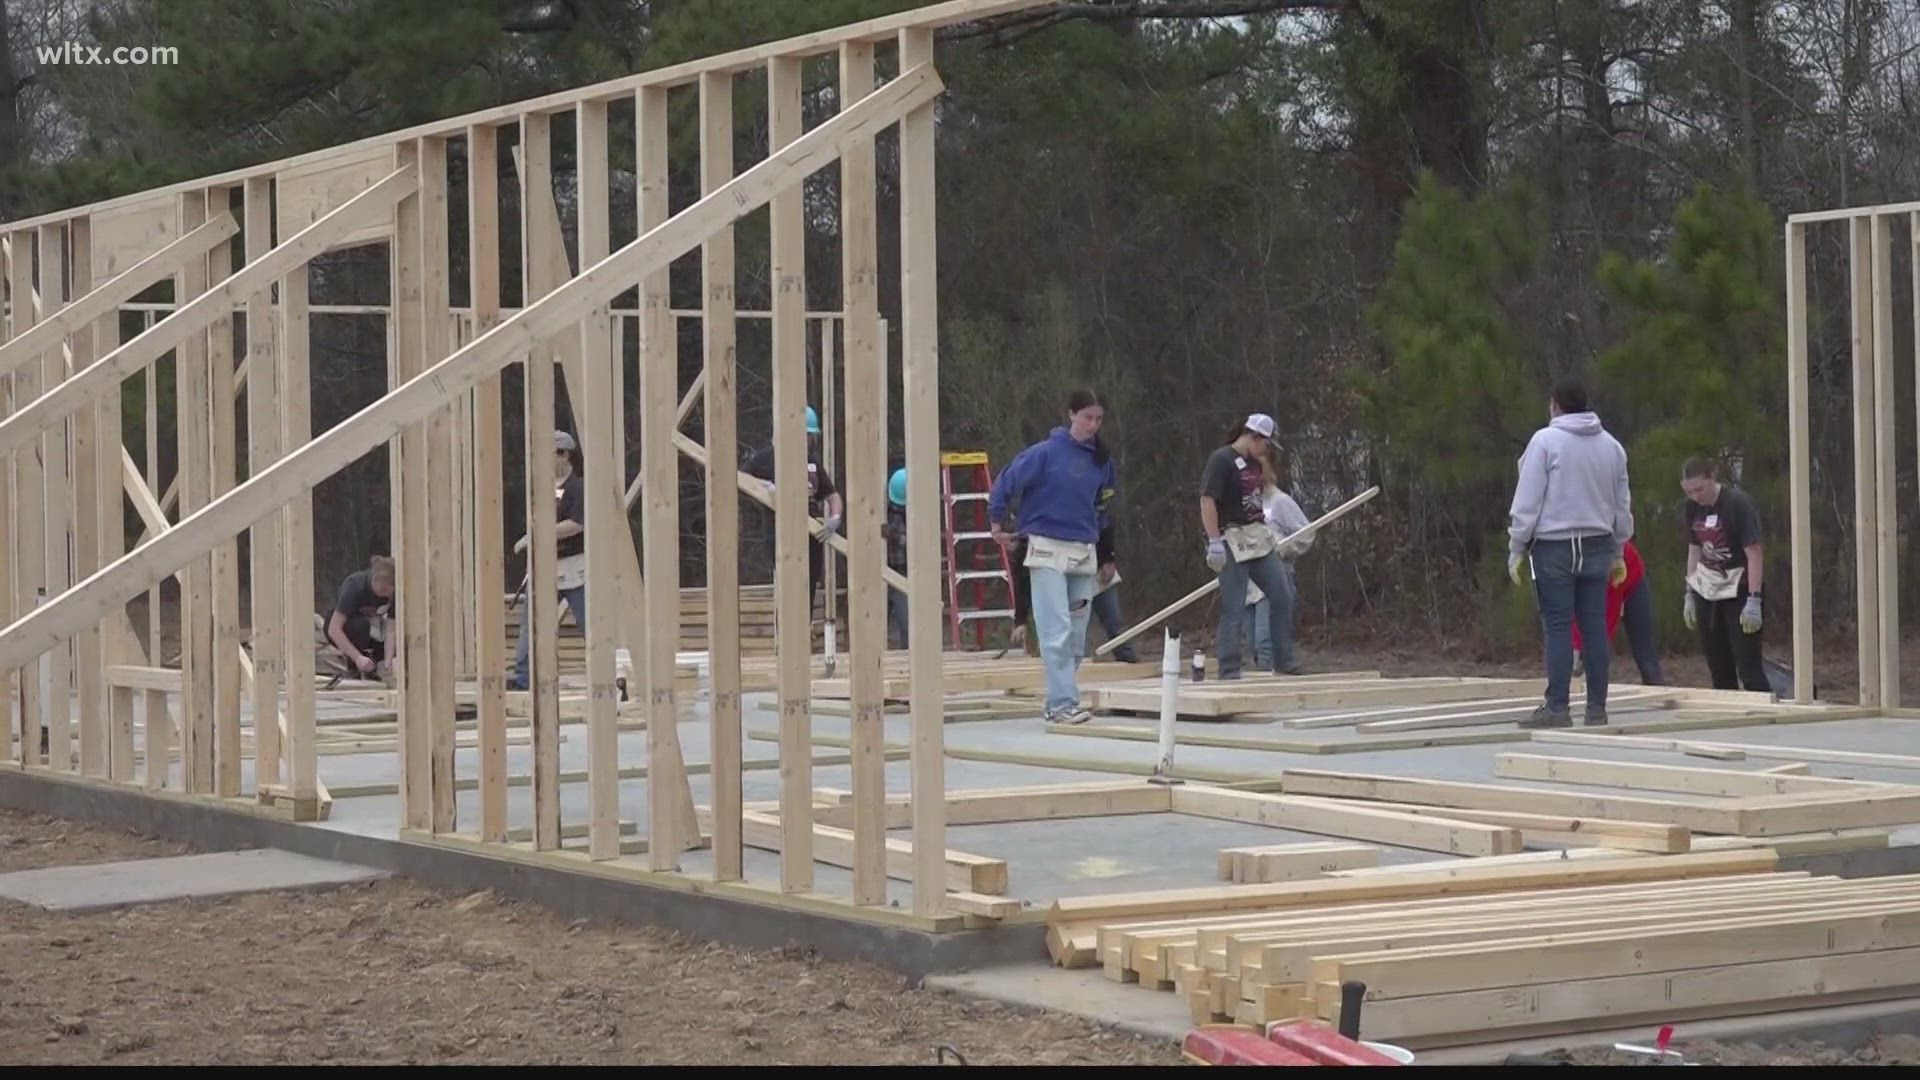 College students from the Midlands and as far away as Utah are helping Habitat for Humanity in Sumter.